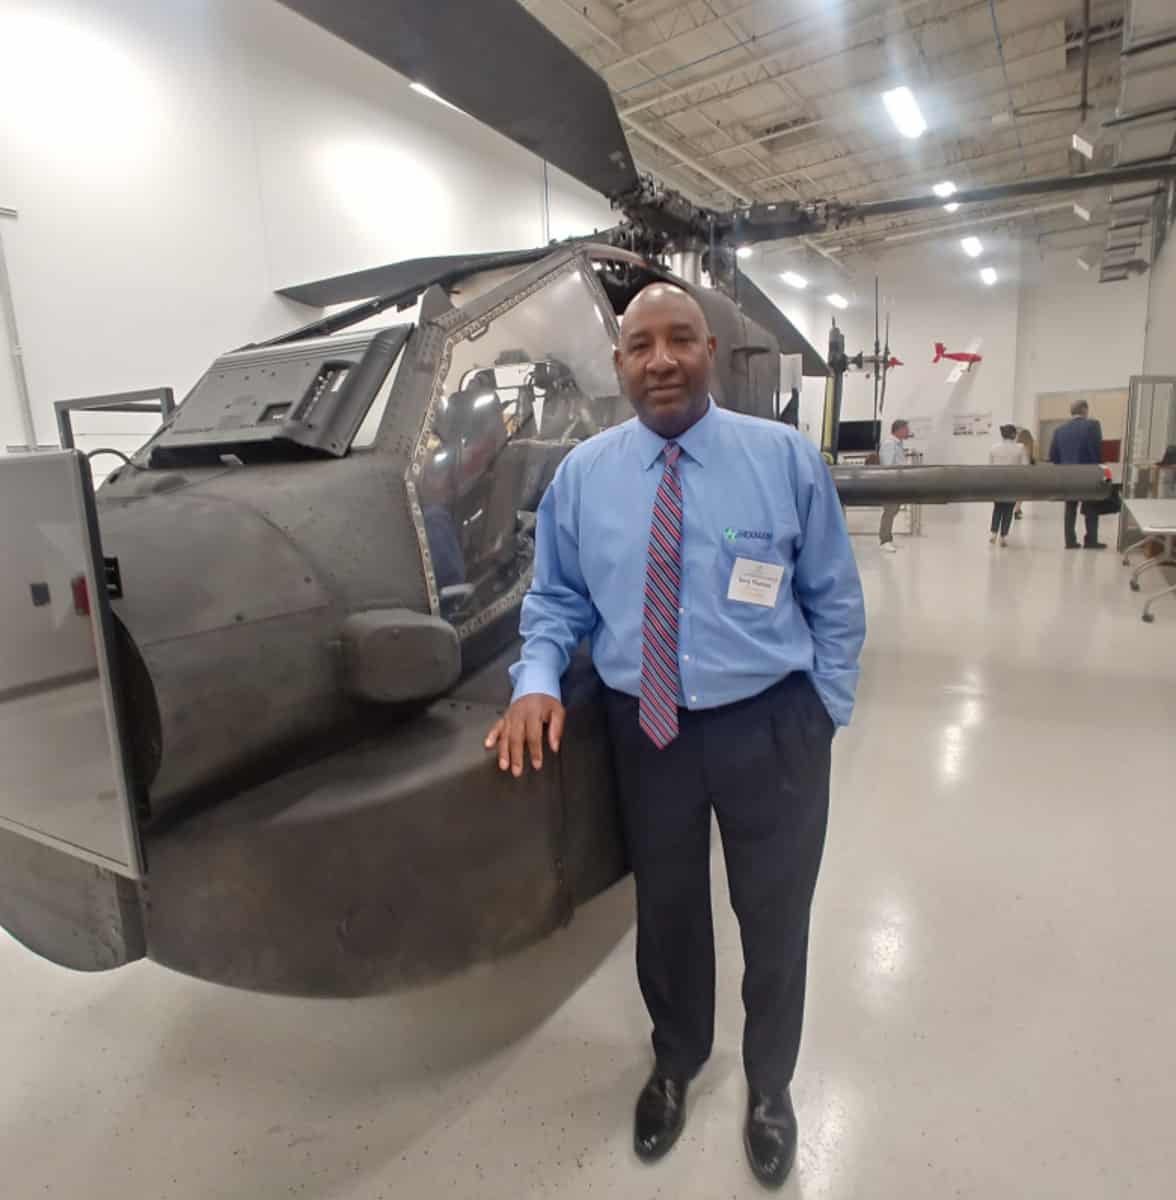 SGTC Aviation Maintenance graduate Terry Thomas is shown above. He is now working as a Senior Consultant, MSG3 Maintenance Programs at Hexagon US Federal.